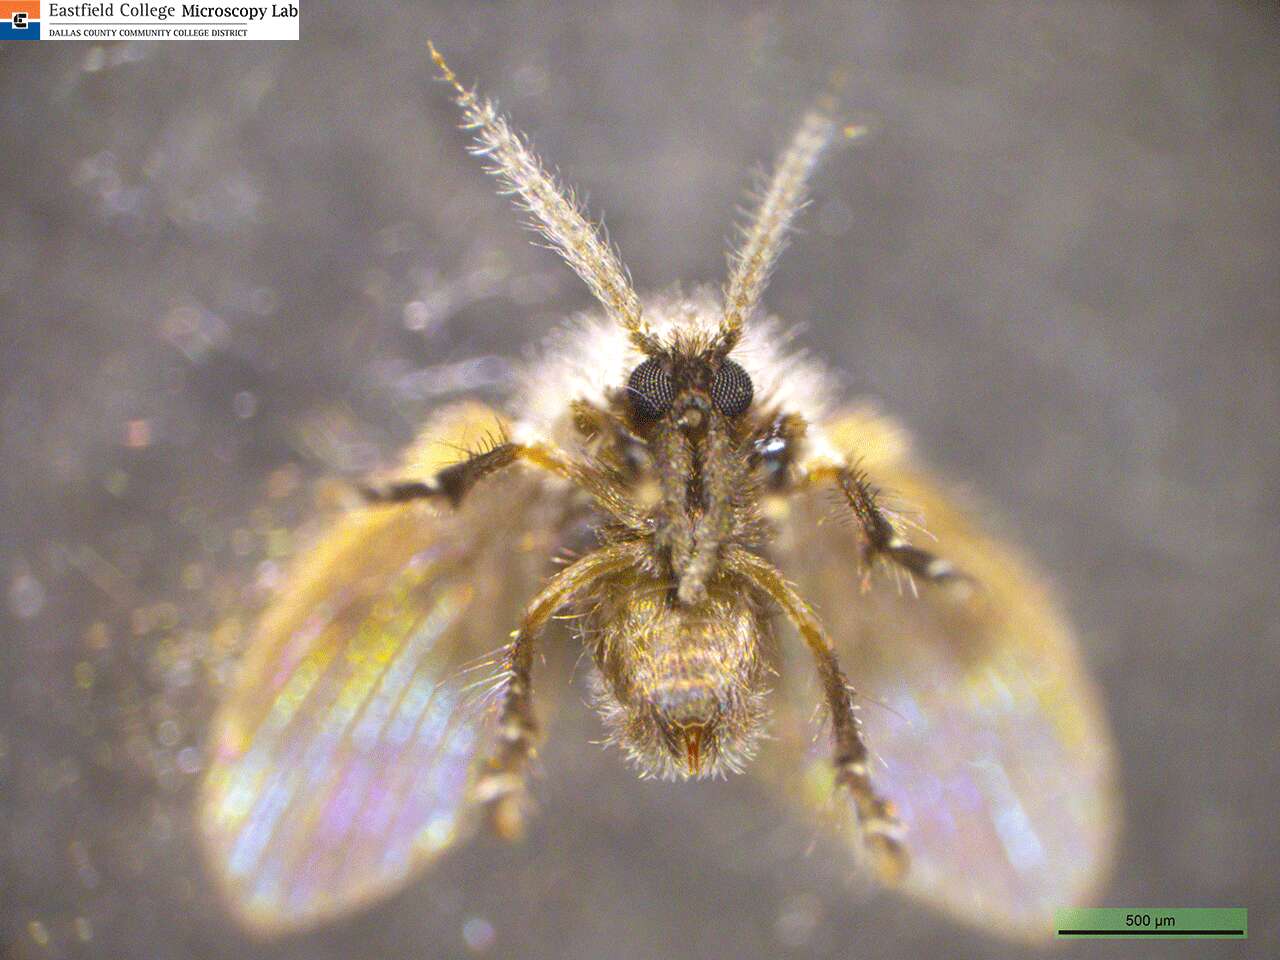 Image of insects